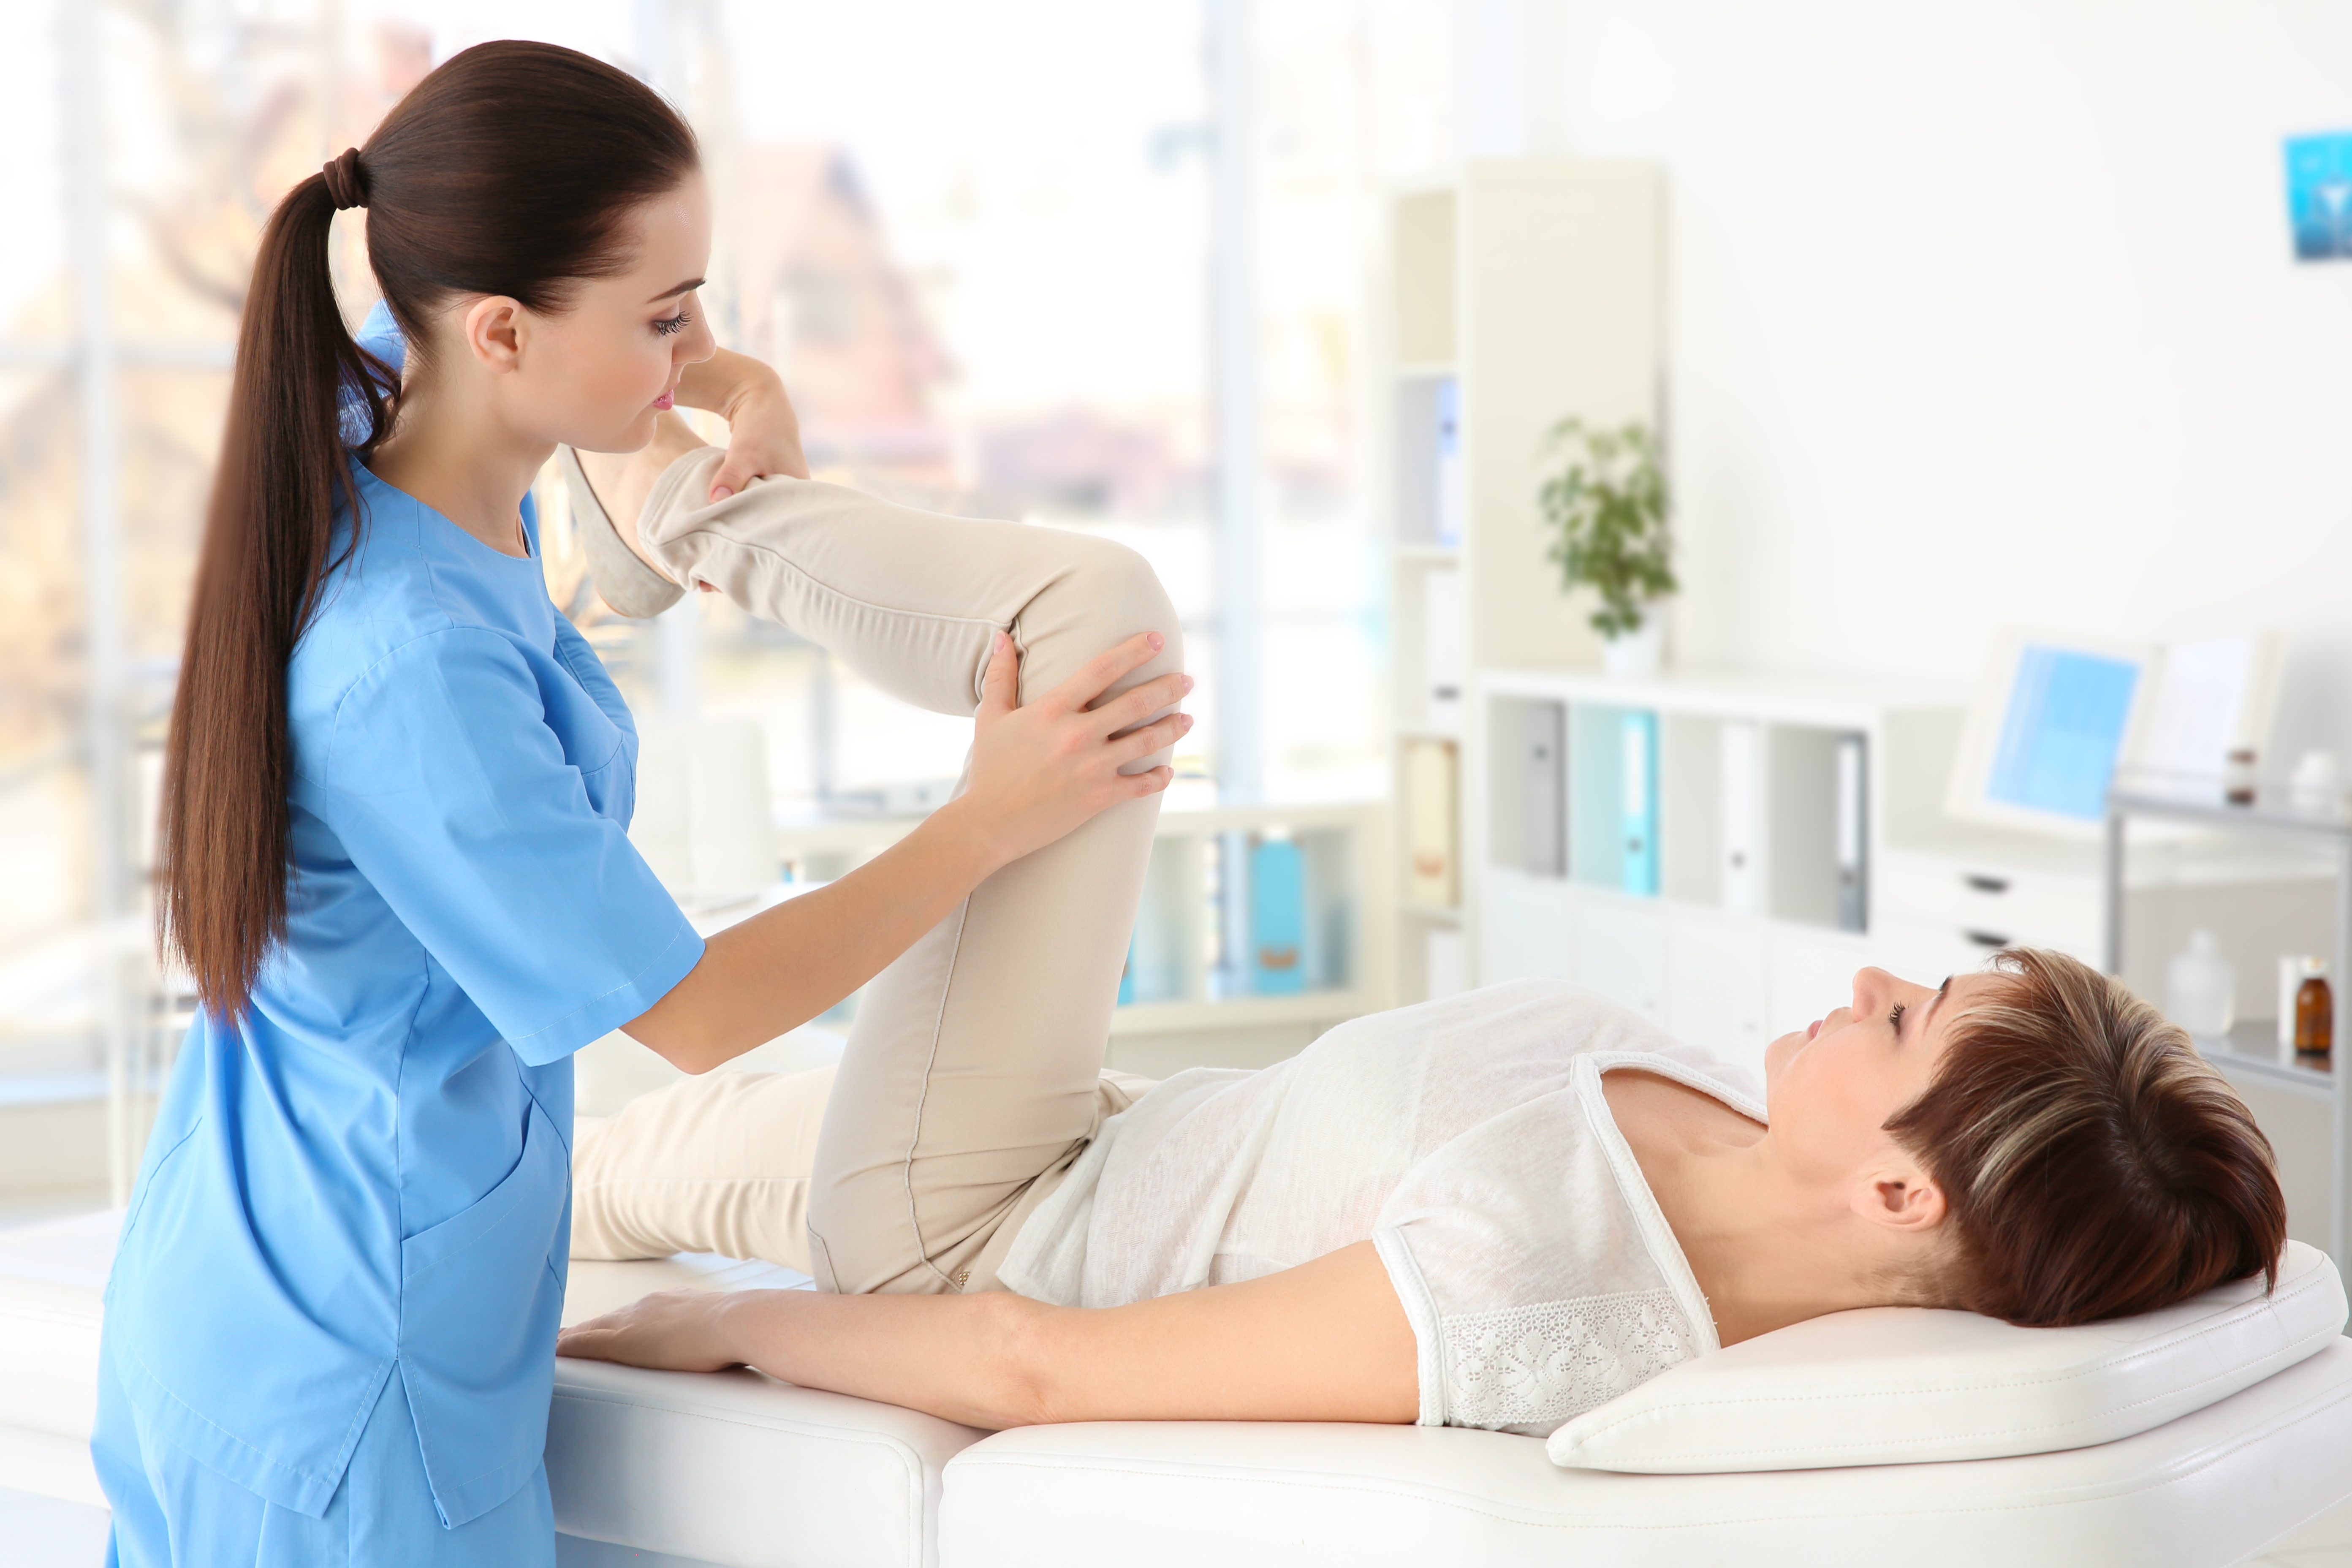 Physiotherapist Assistant Role